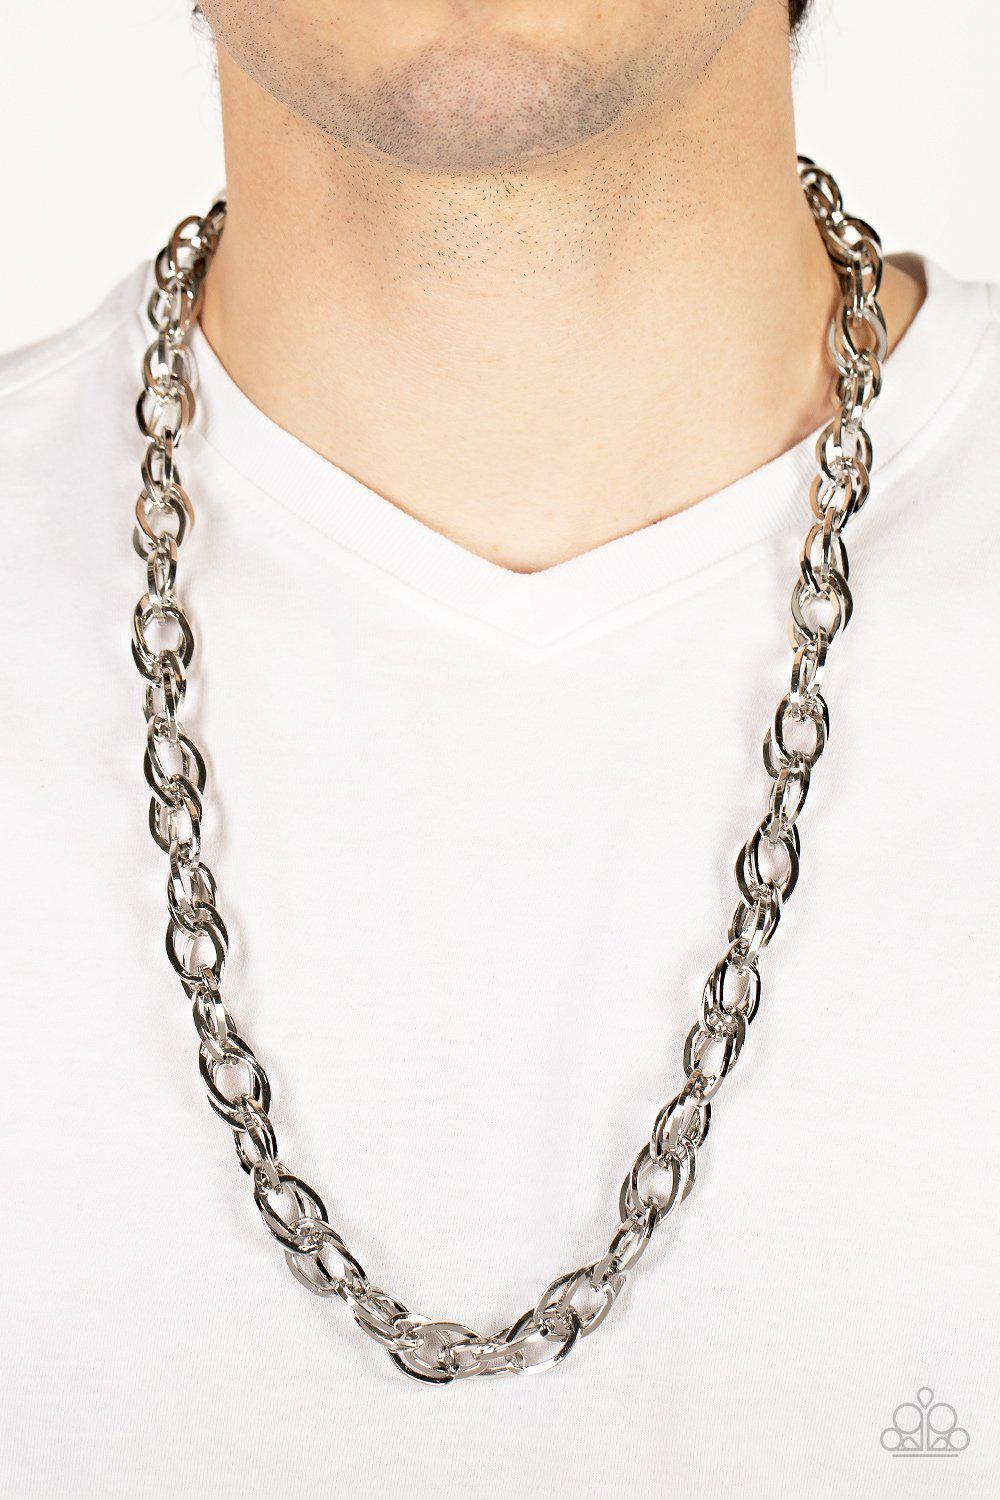 Custom Couture Men's Silver Necklace - Paparazzi Accessories - model -CarasShop.com - $5 Jewelry by Cara Jewels